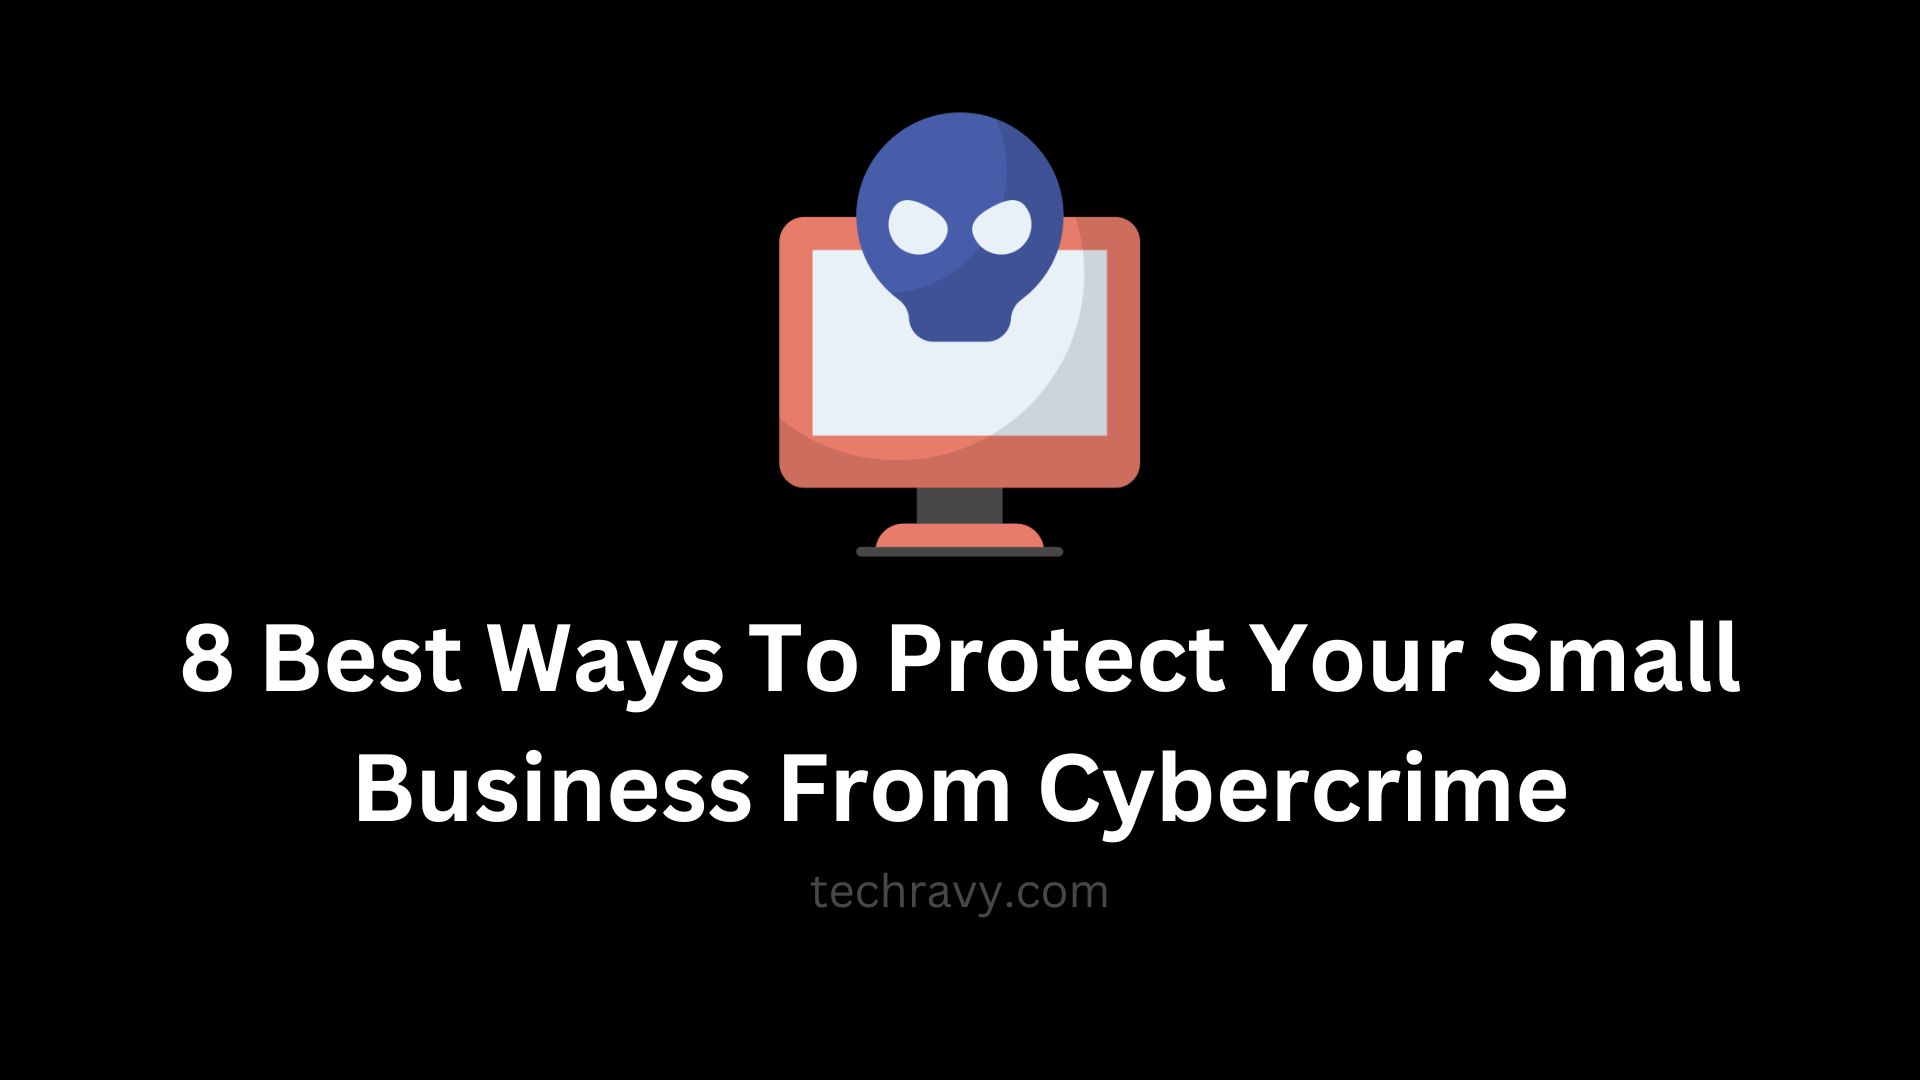 8 Best Ways To Protect Your Small Business From Cybercrime